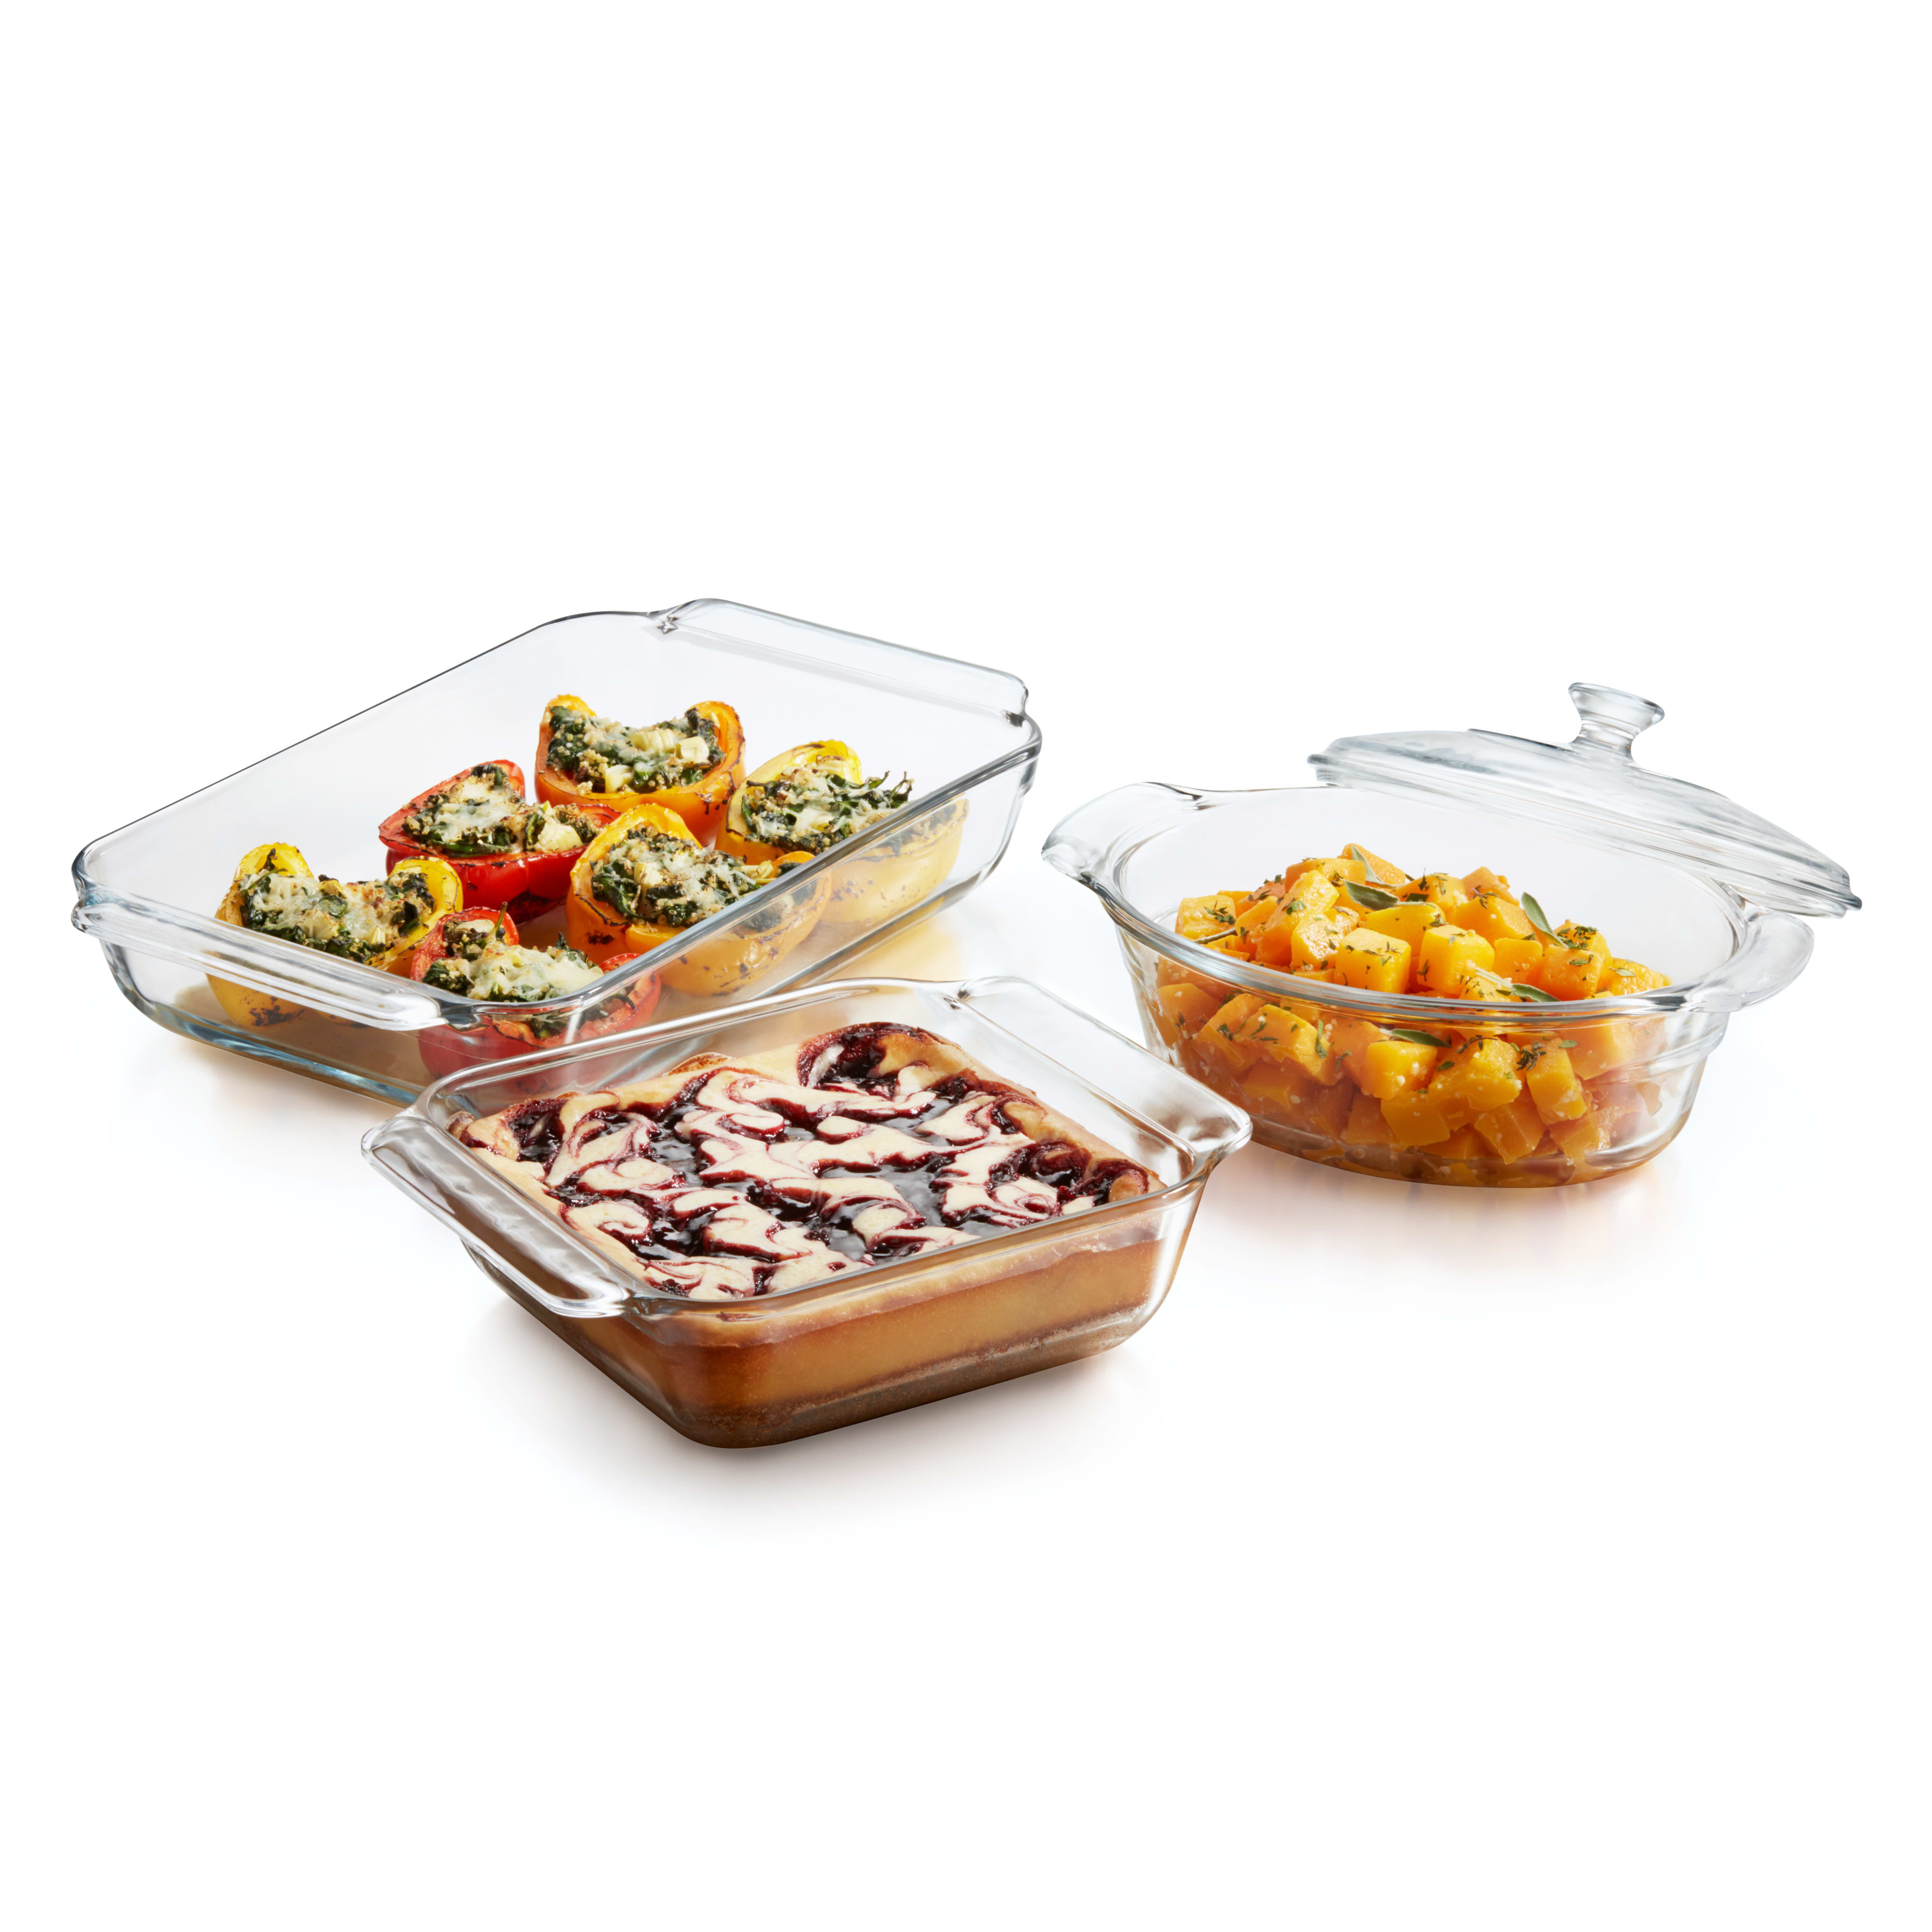 Libbey Baker S Premium 3 Piece Glass Casserole Baking Dish Set With 1 Cover